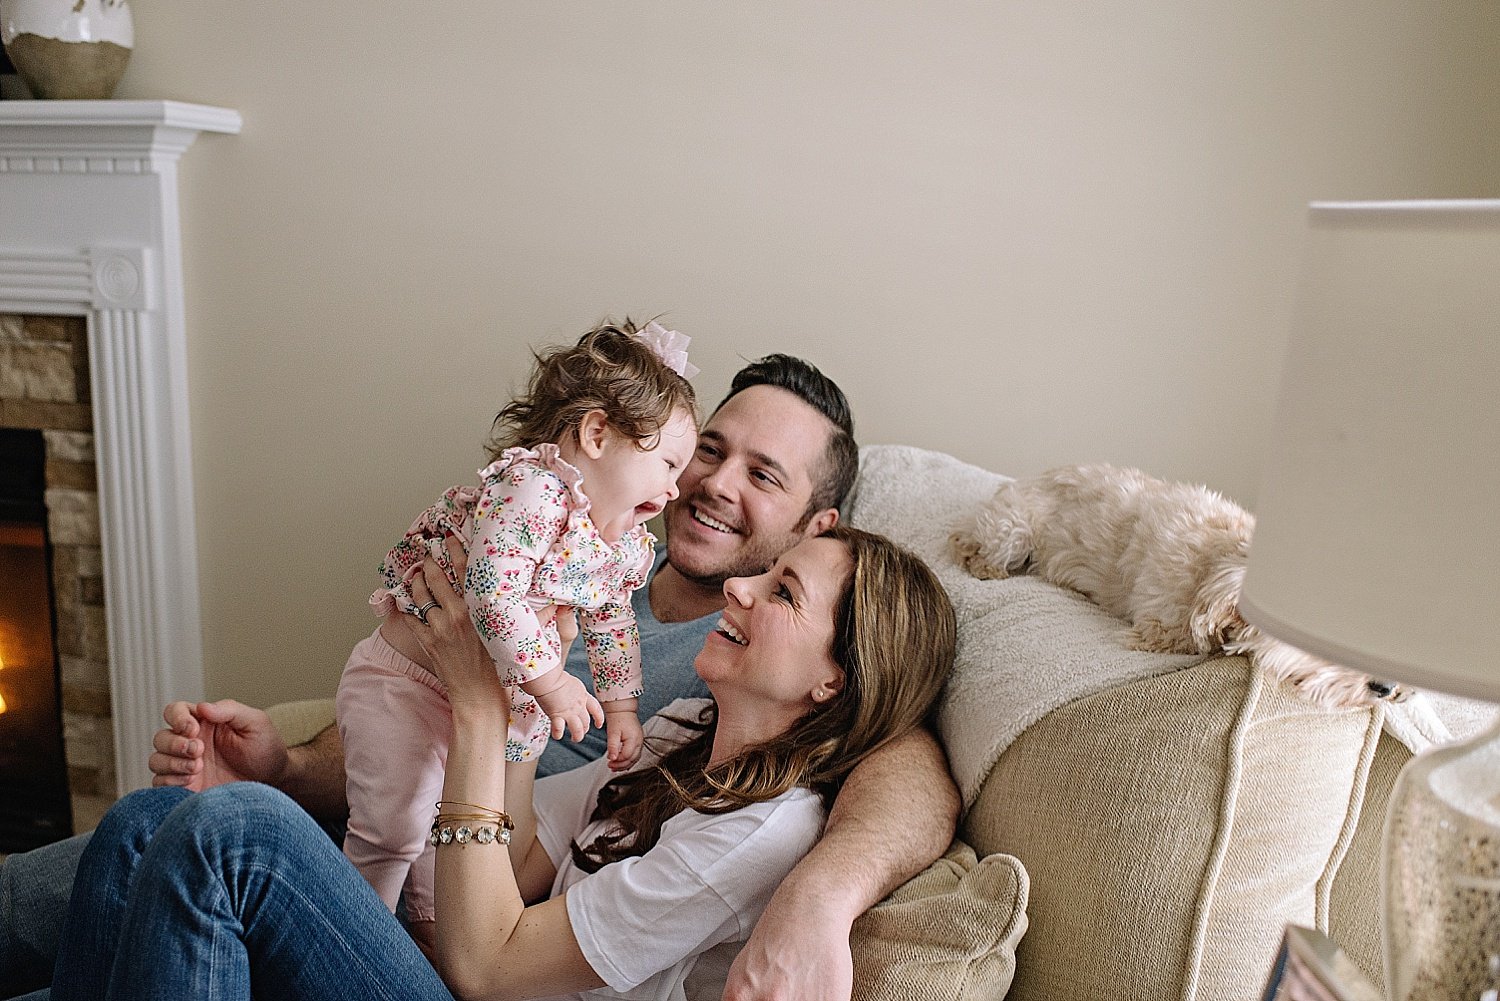 toth-family-lifestyle-in-home-portraits-lauren-grayson-photography-cleveland-child-photographer (19).jpeg